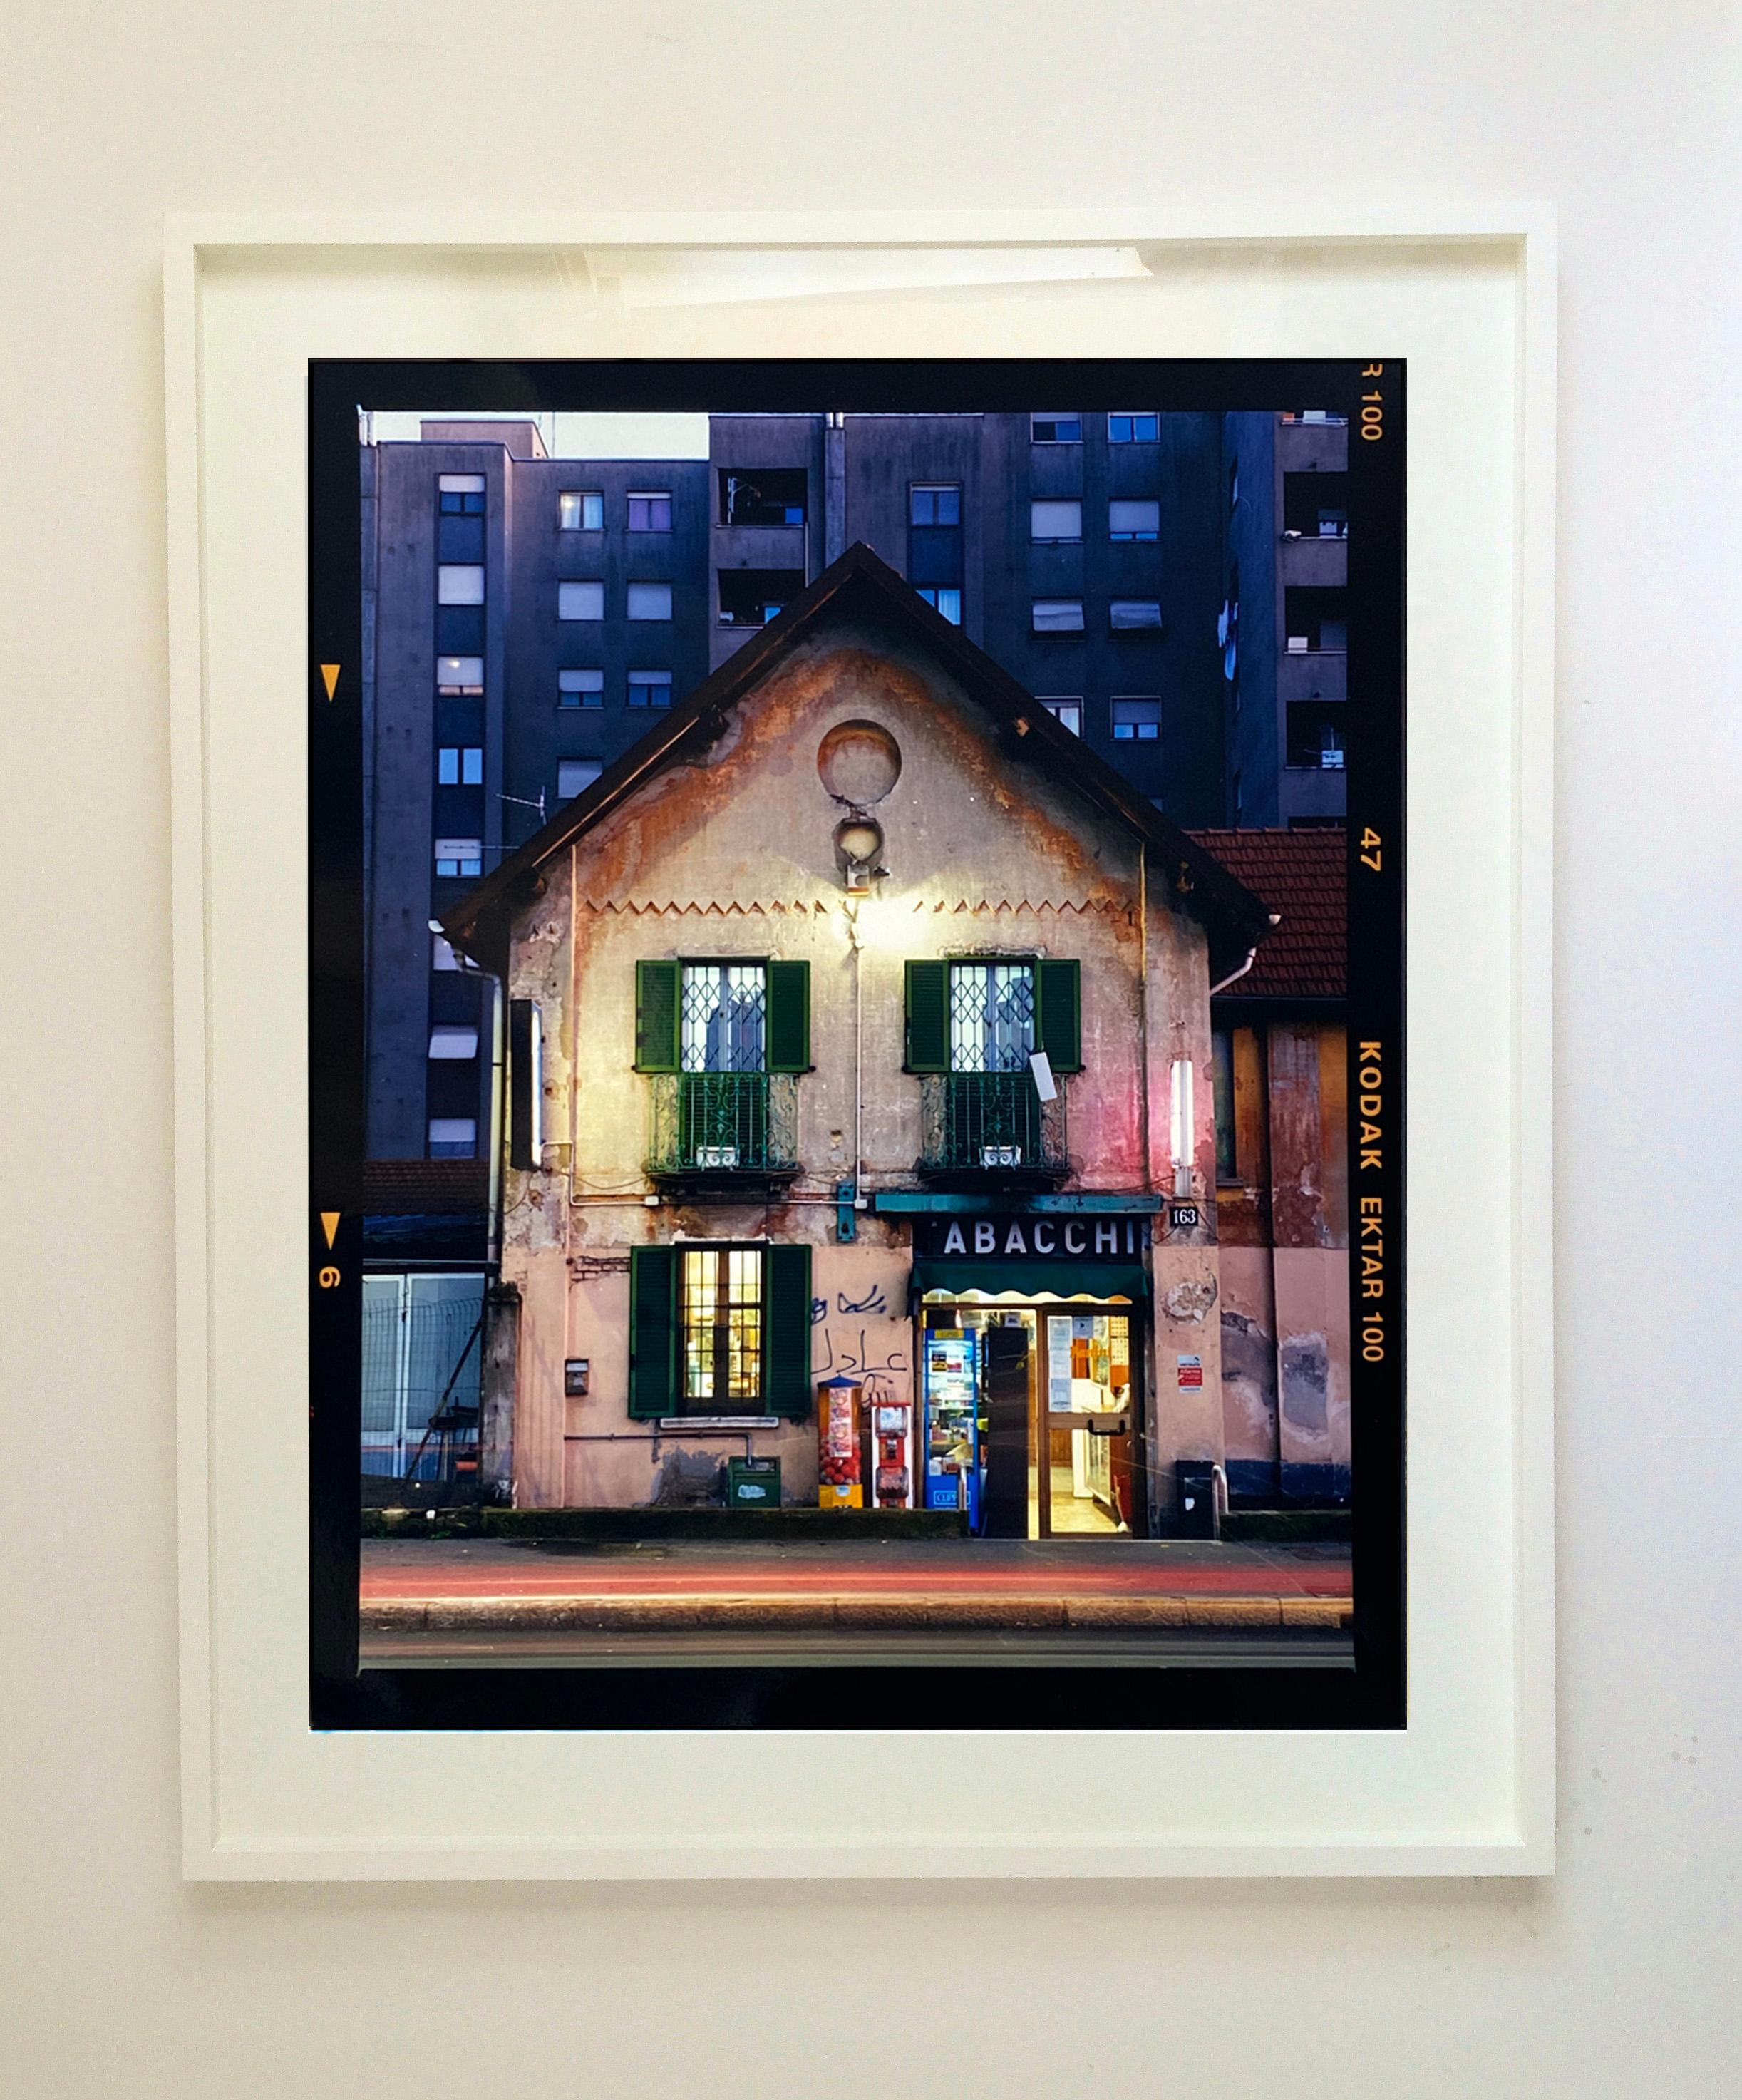 TABACCHI at Twilight, Milan - Architectural Color Photography For Sale 1